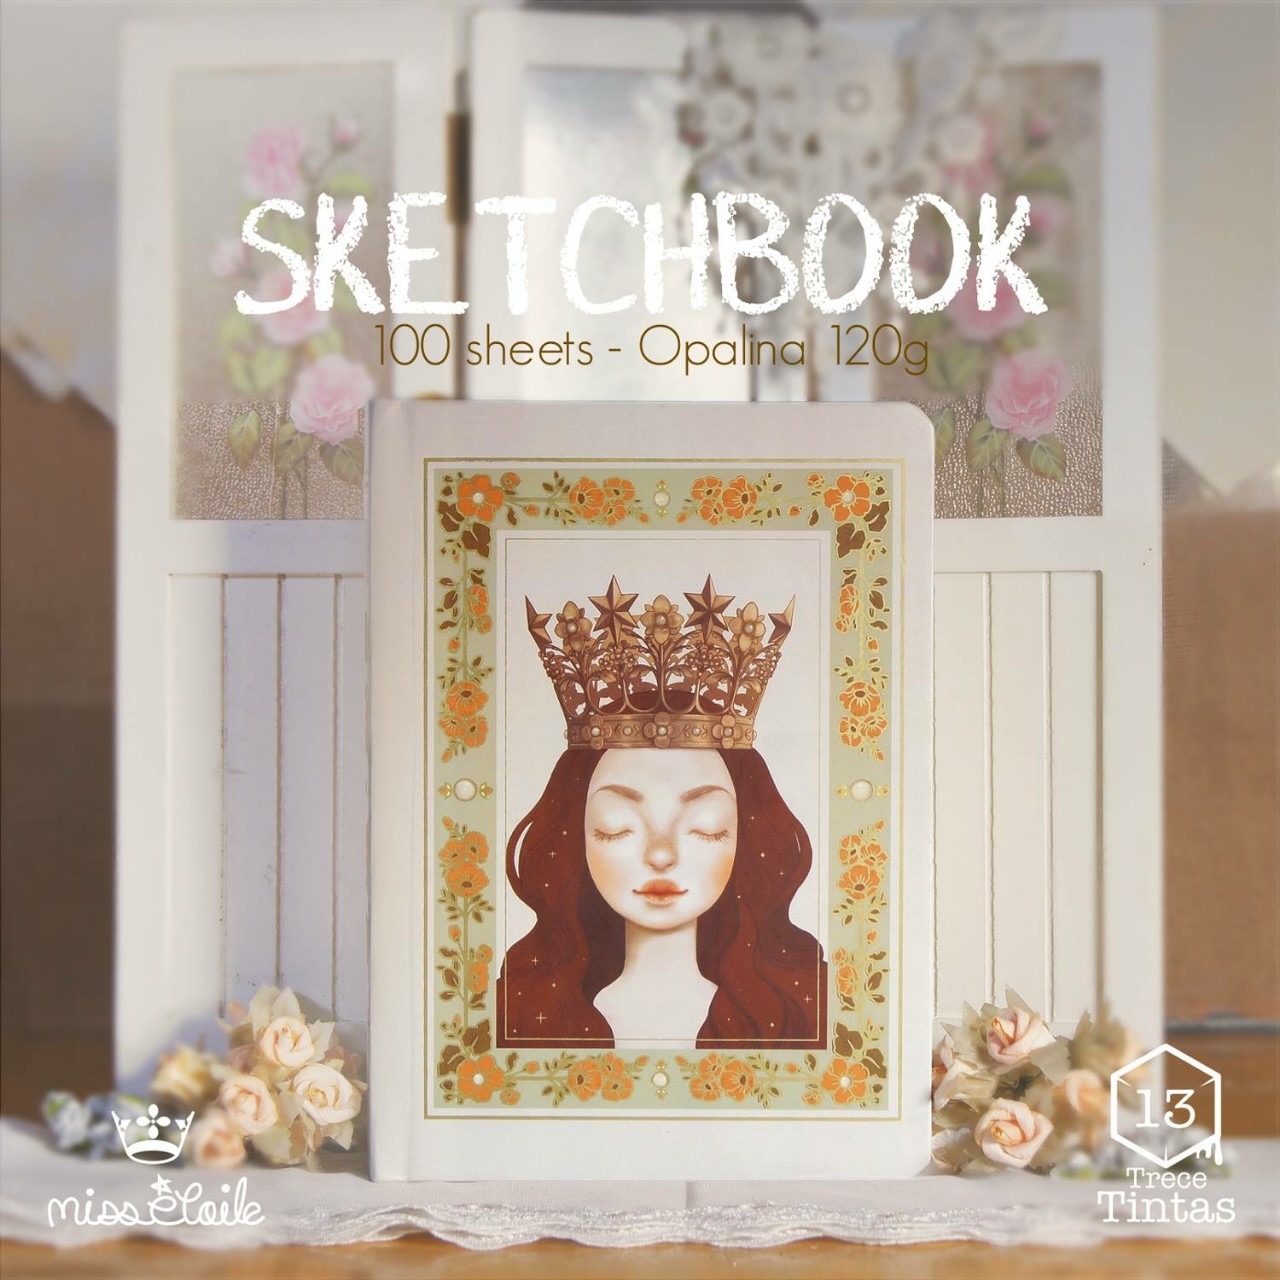 You can purchase now the sketchbook at:http://missetoile.storenvy.com Designed by me and handmade by Inkcube.